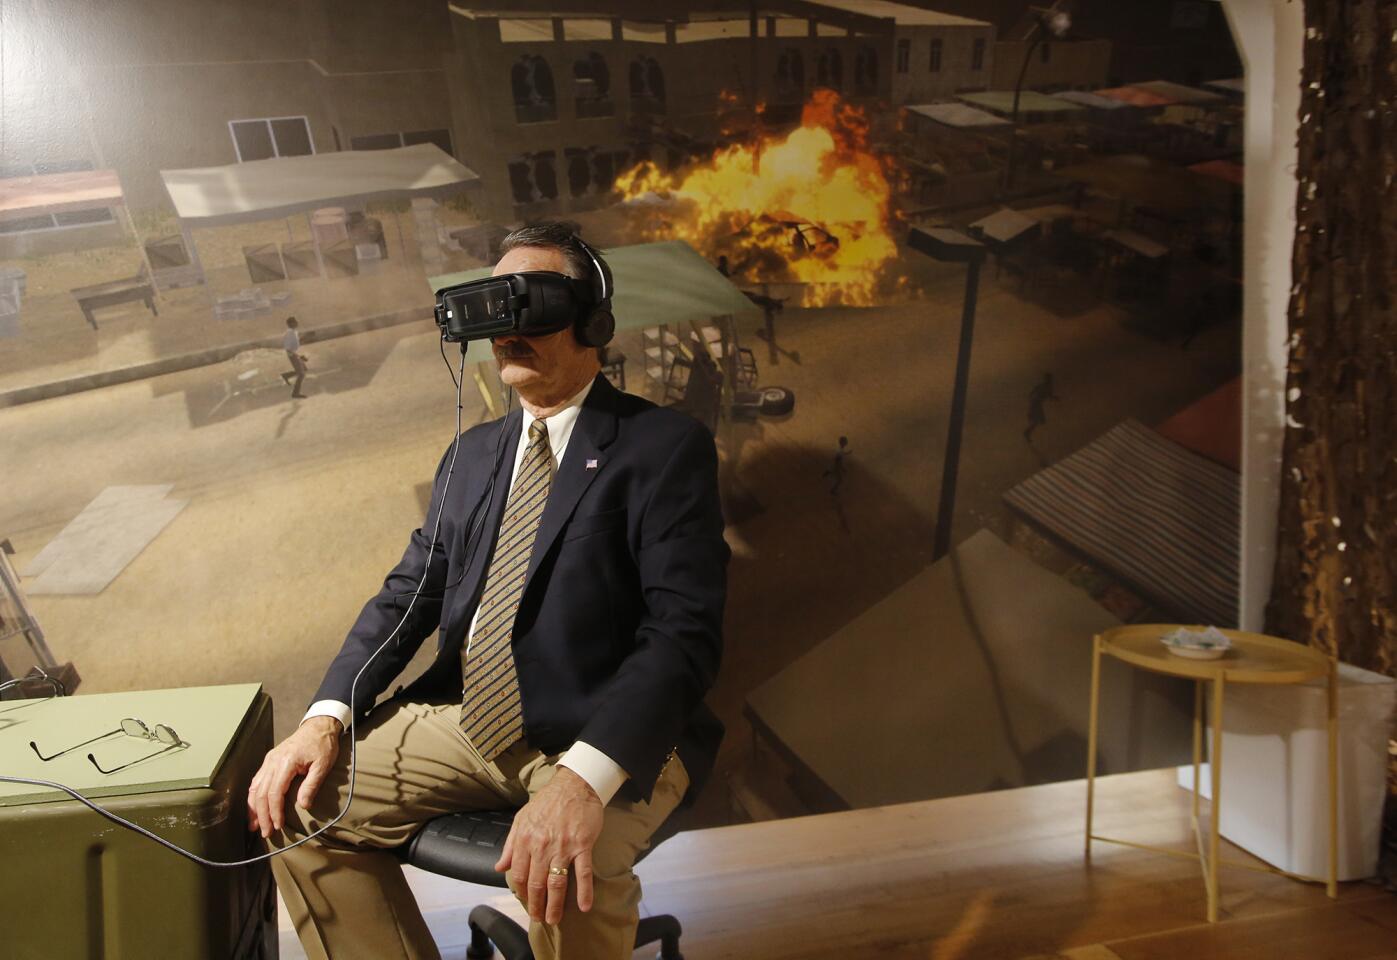 A guest views a war-torn street in Iraq through a virtual reality headset during a preview of “Bravemind: Using Virtual Reality to Combat PTSD,” a new exhibit at the Heroes Hall veterans museum at the OC Fair & Event Center in Costa Mesa. The breakthrough technology, created by USC's Institute for Creative Technologies, is used to treat post-traumatic stress disorder in military service members.